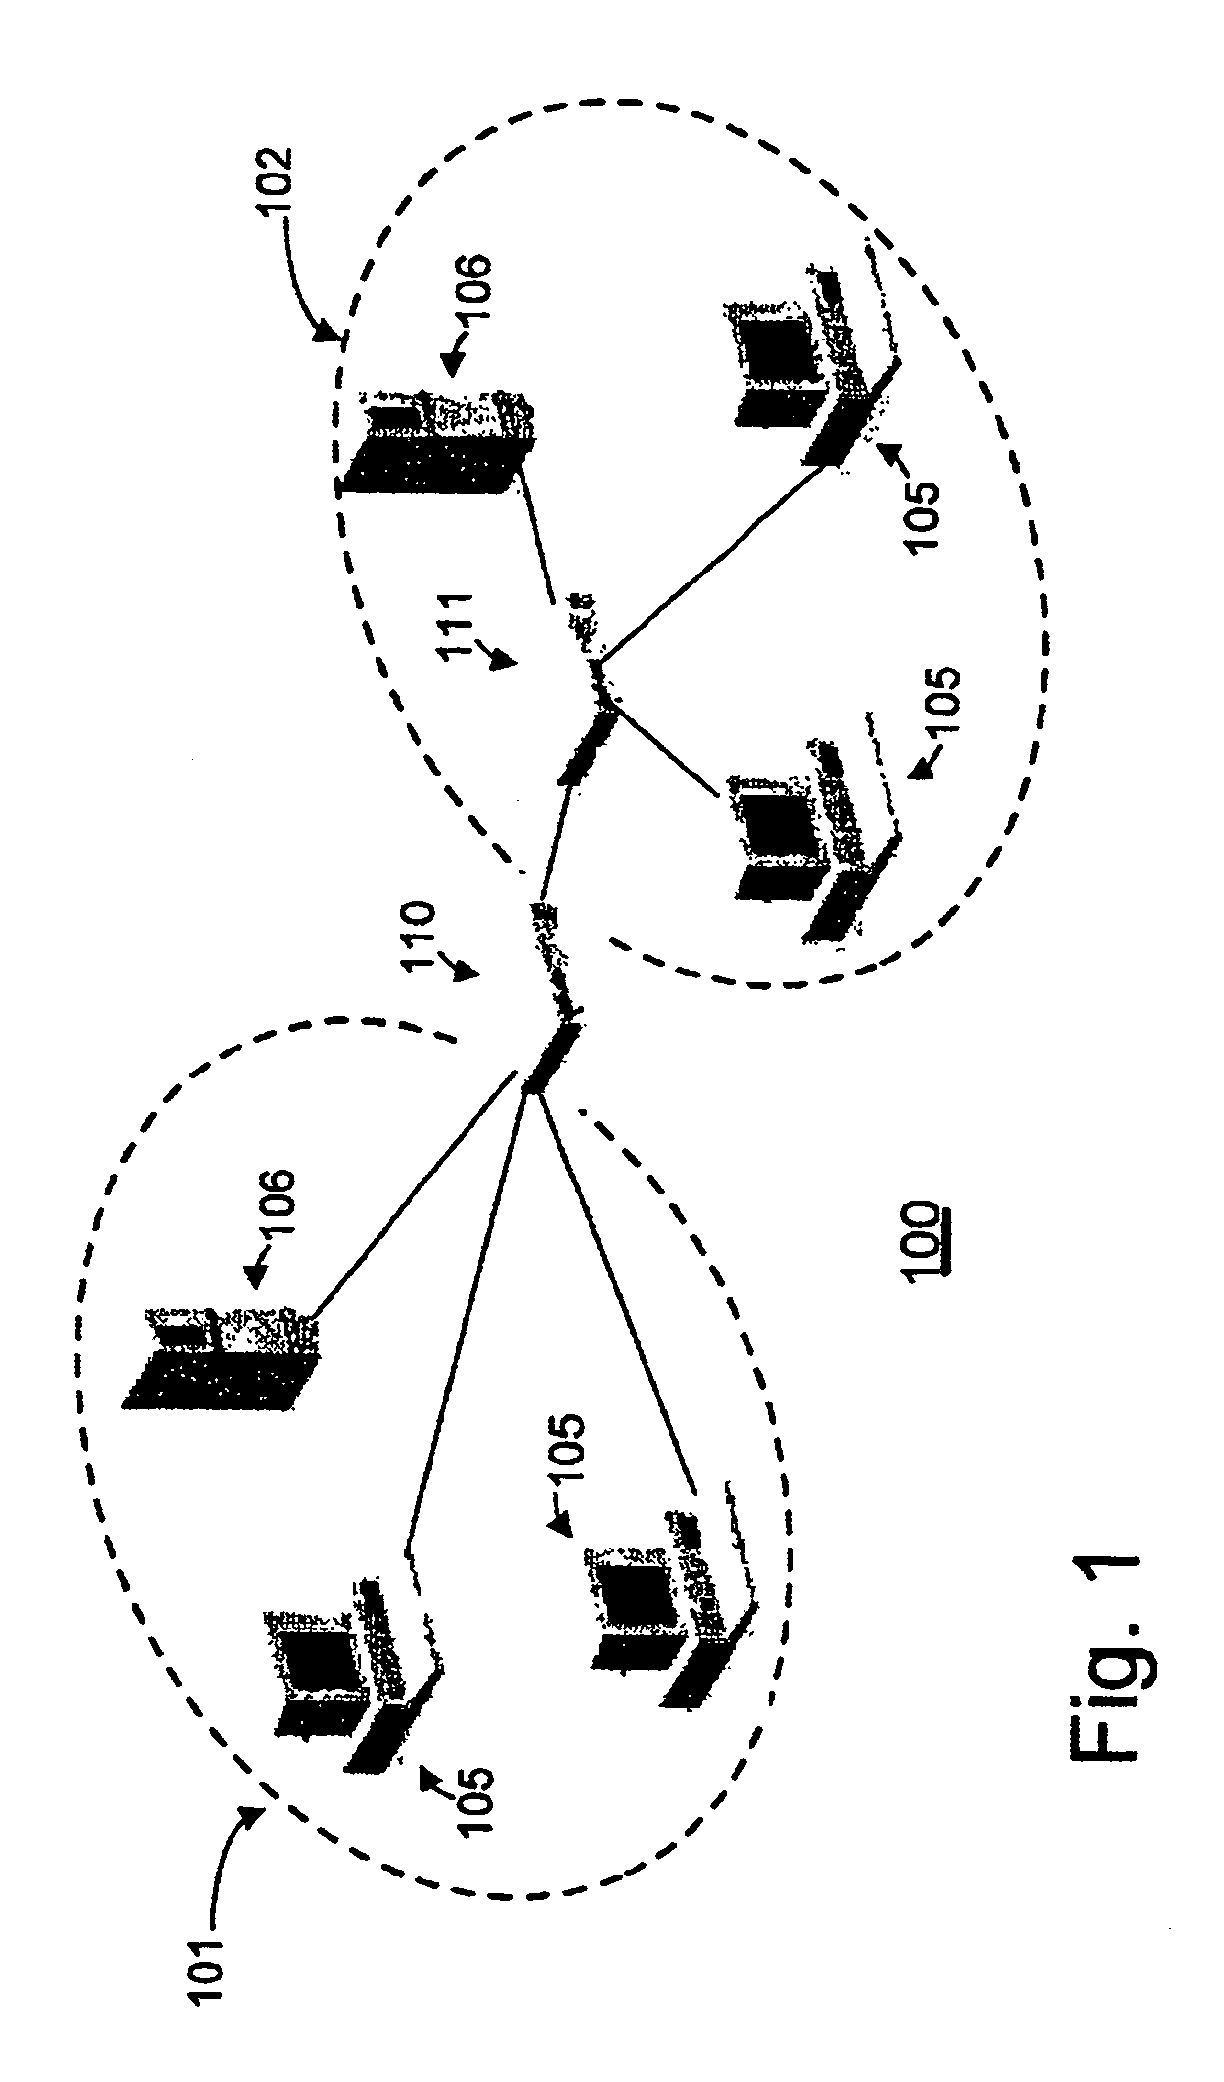 Address modification within a switching device in a packet-switched network